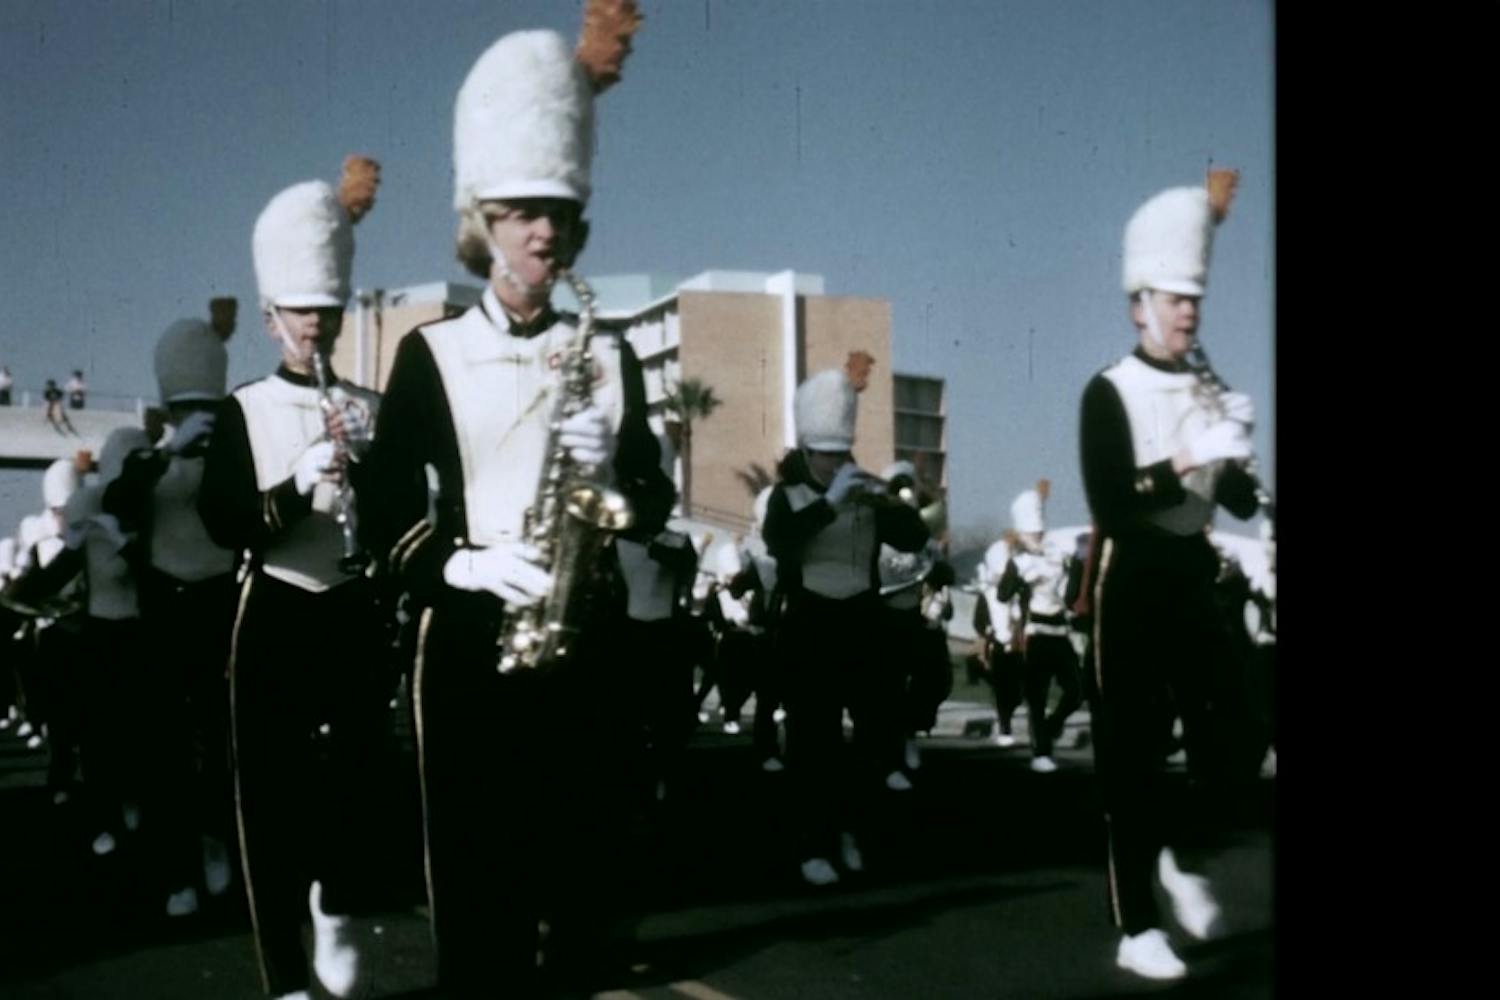 Band students march in a screenshot from the&nbsp;Arizona State University: Campus in the Sun video.